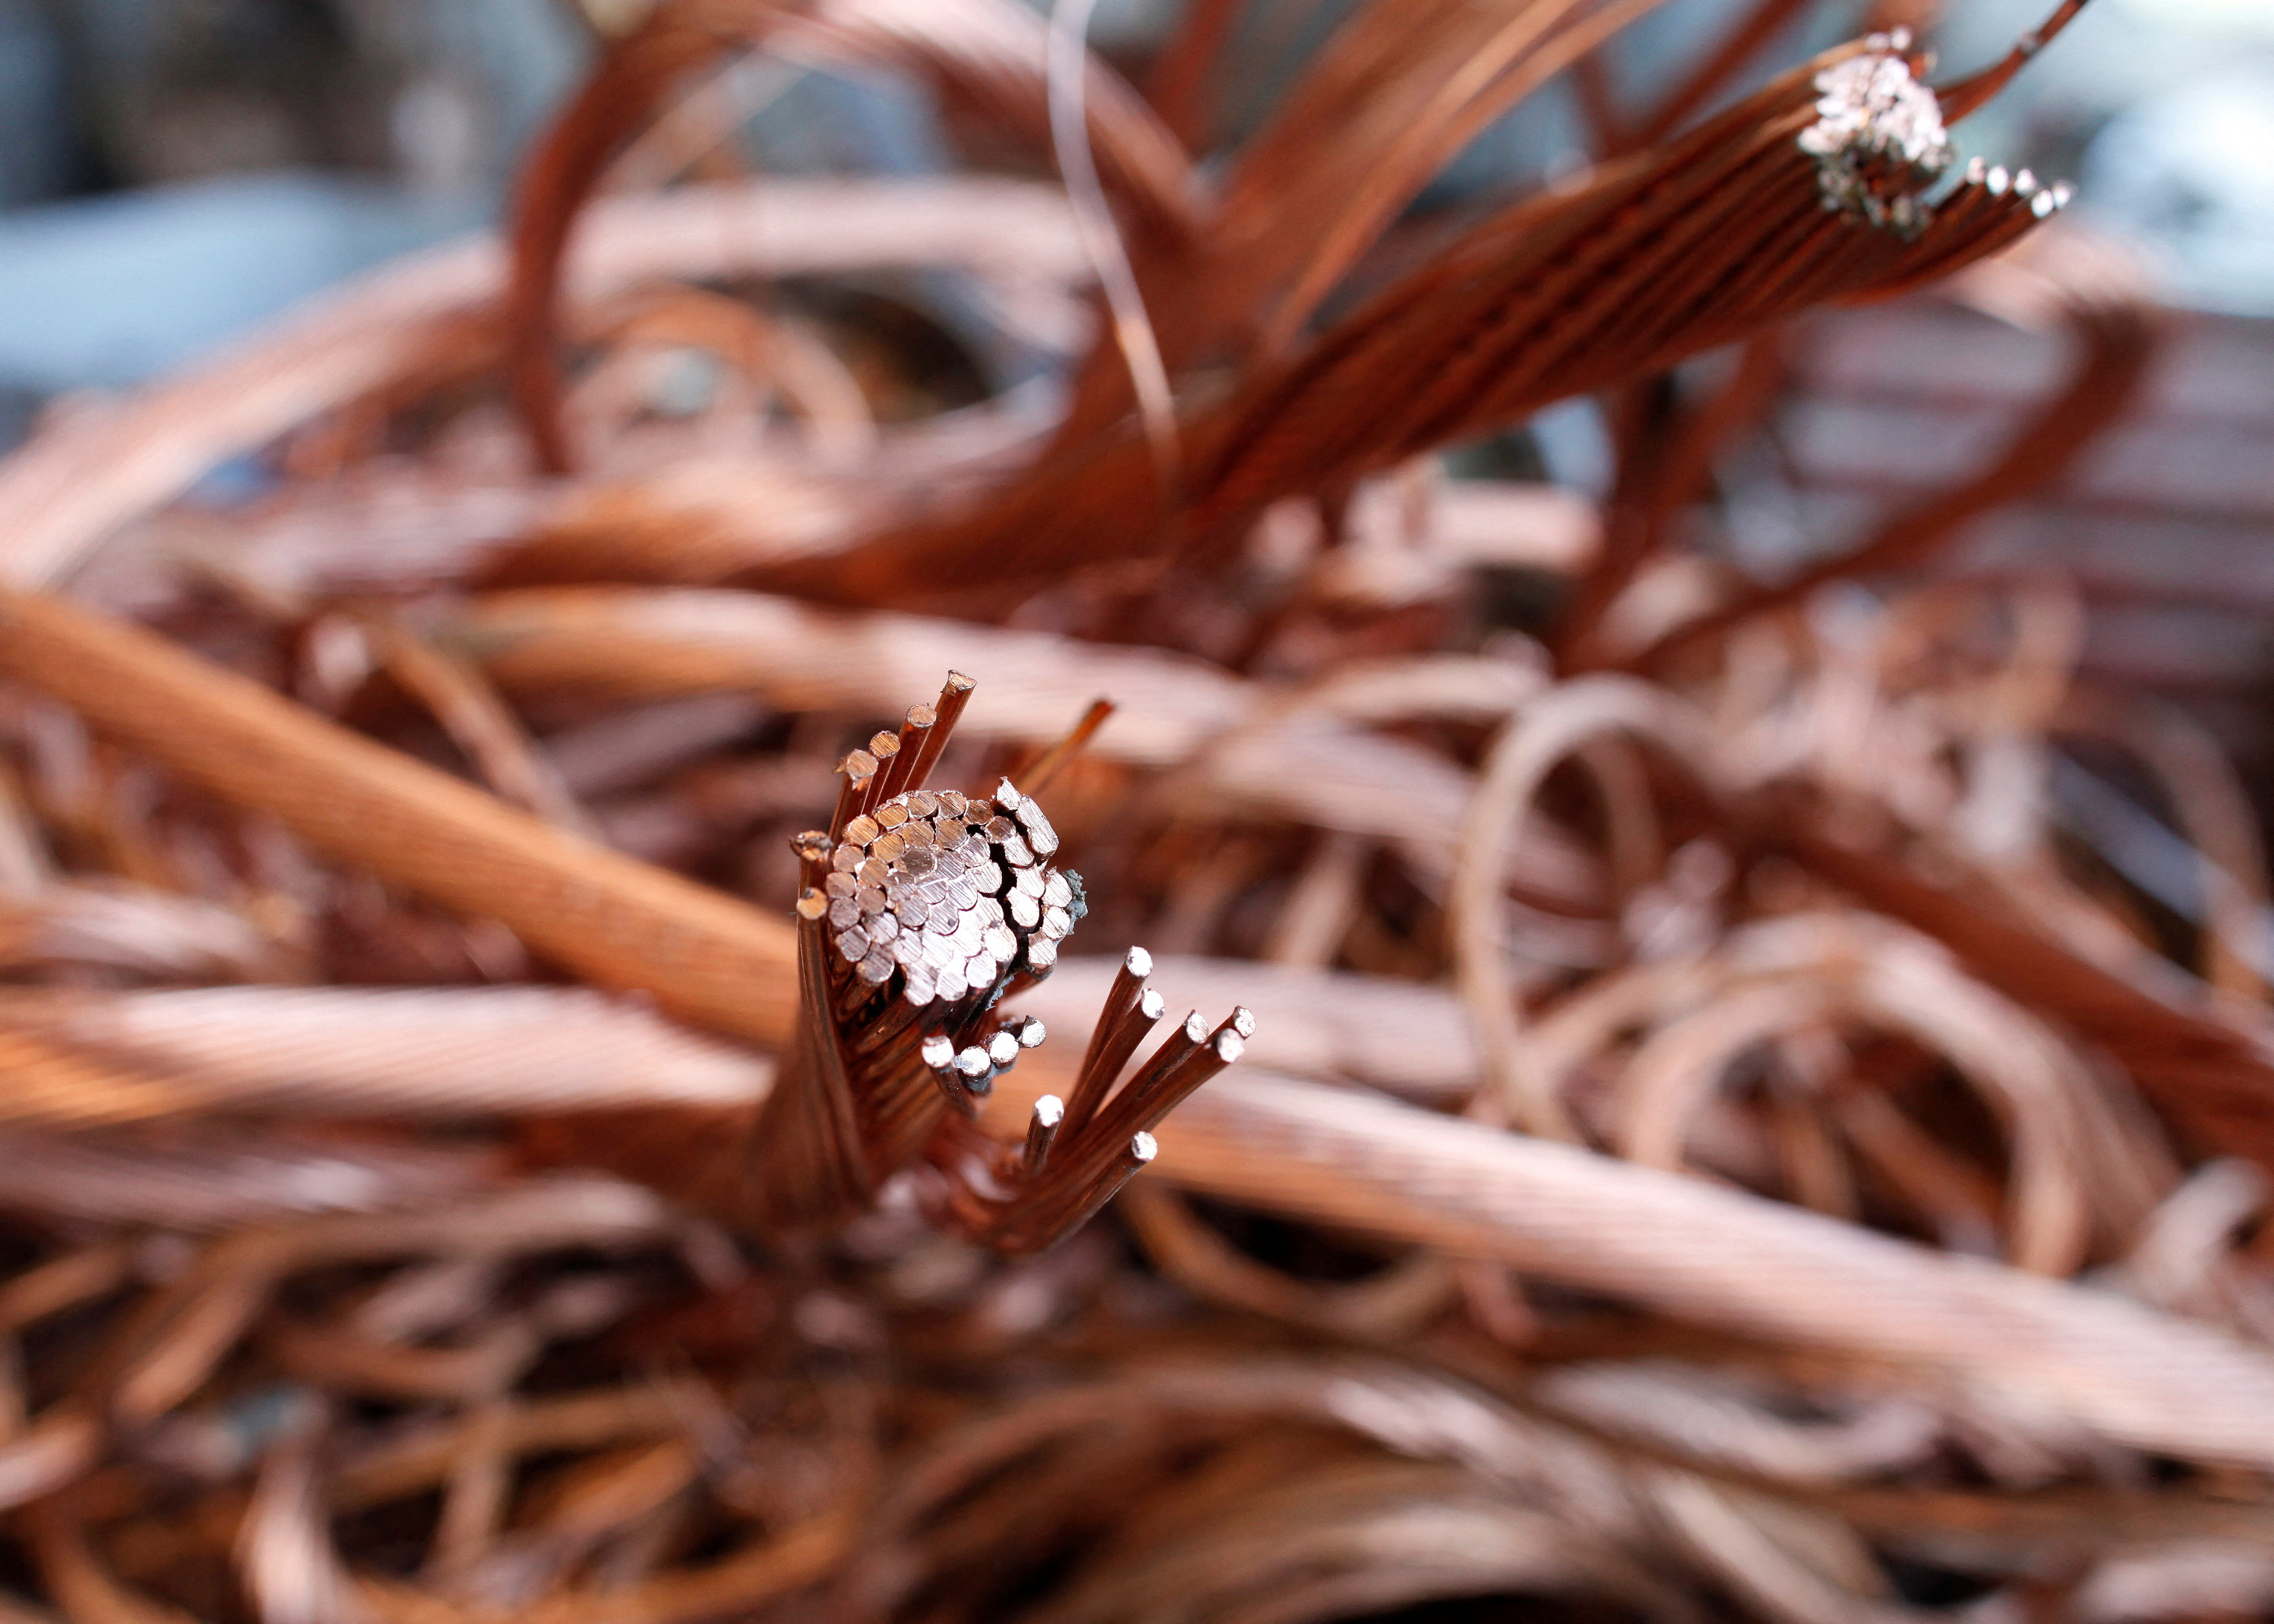 Used copper wires are seen in a recycling company in Thoerishaus near Bern